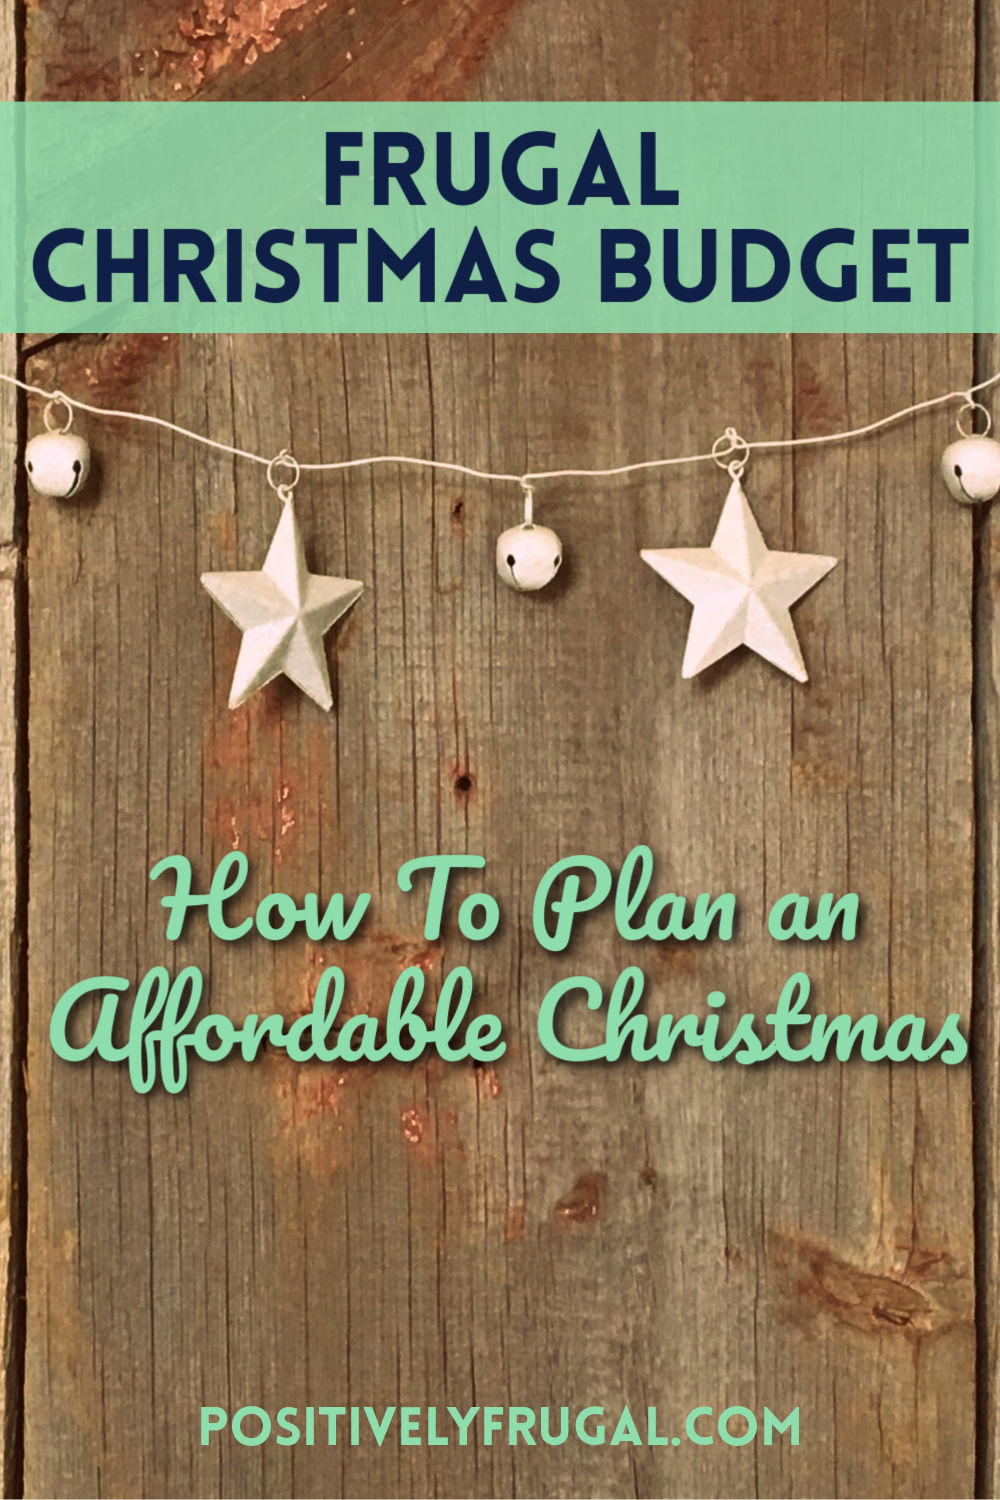 Frugal Christmas Budget Plan an Affordable Christmas by PositivelyFrugal.com